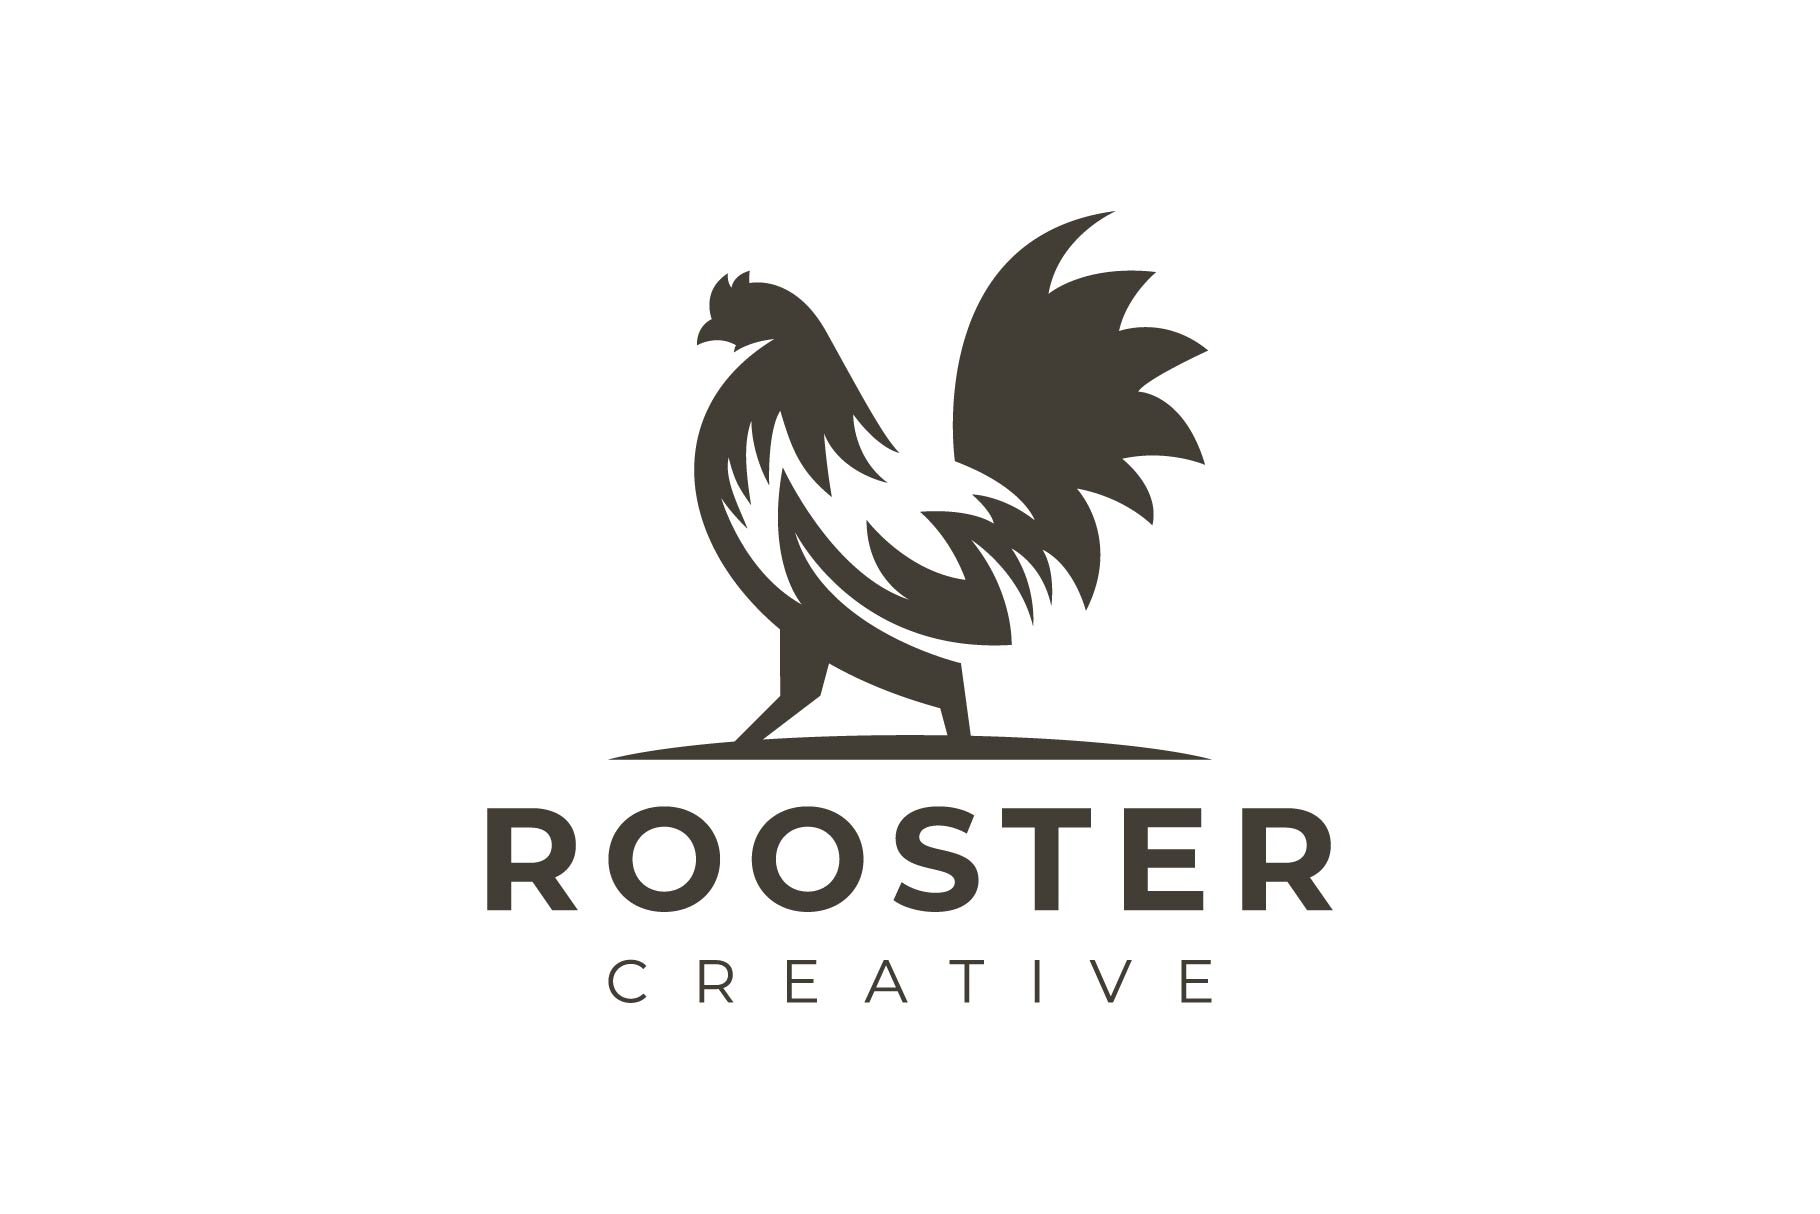 Rooster Silhouette logo cover image.